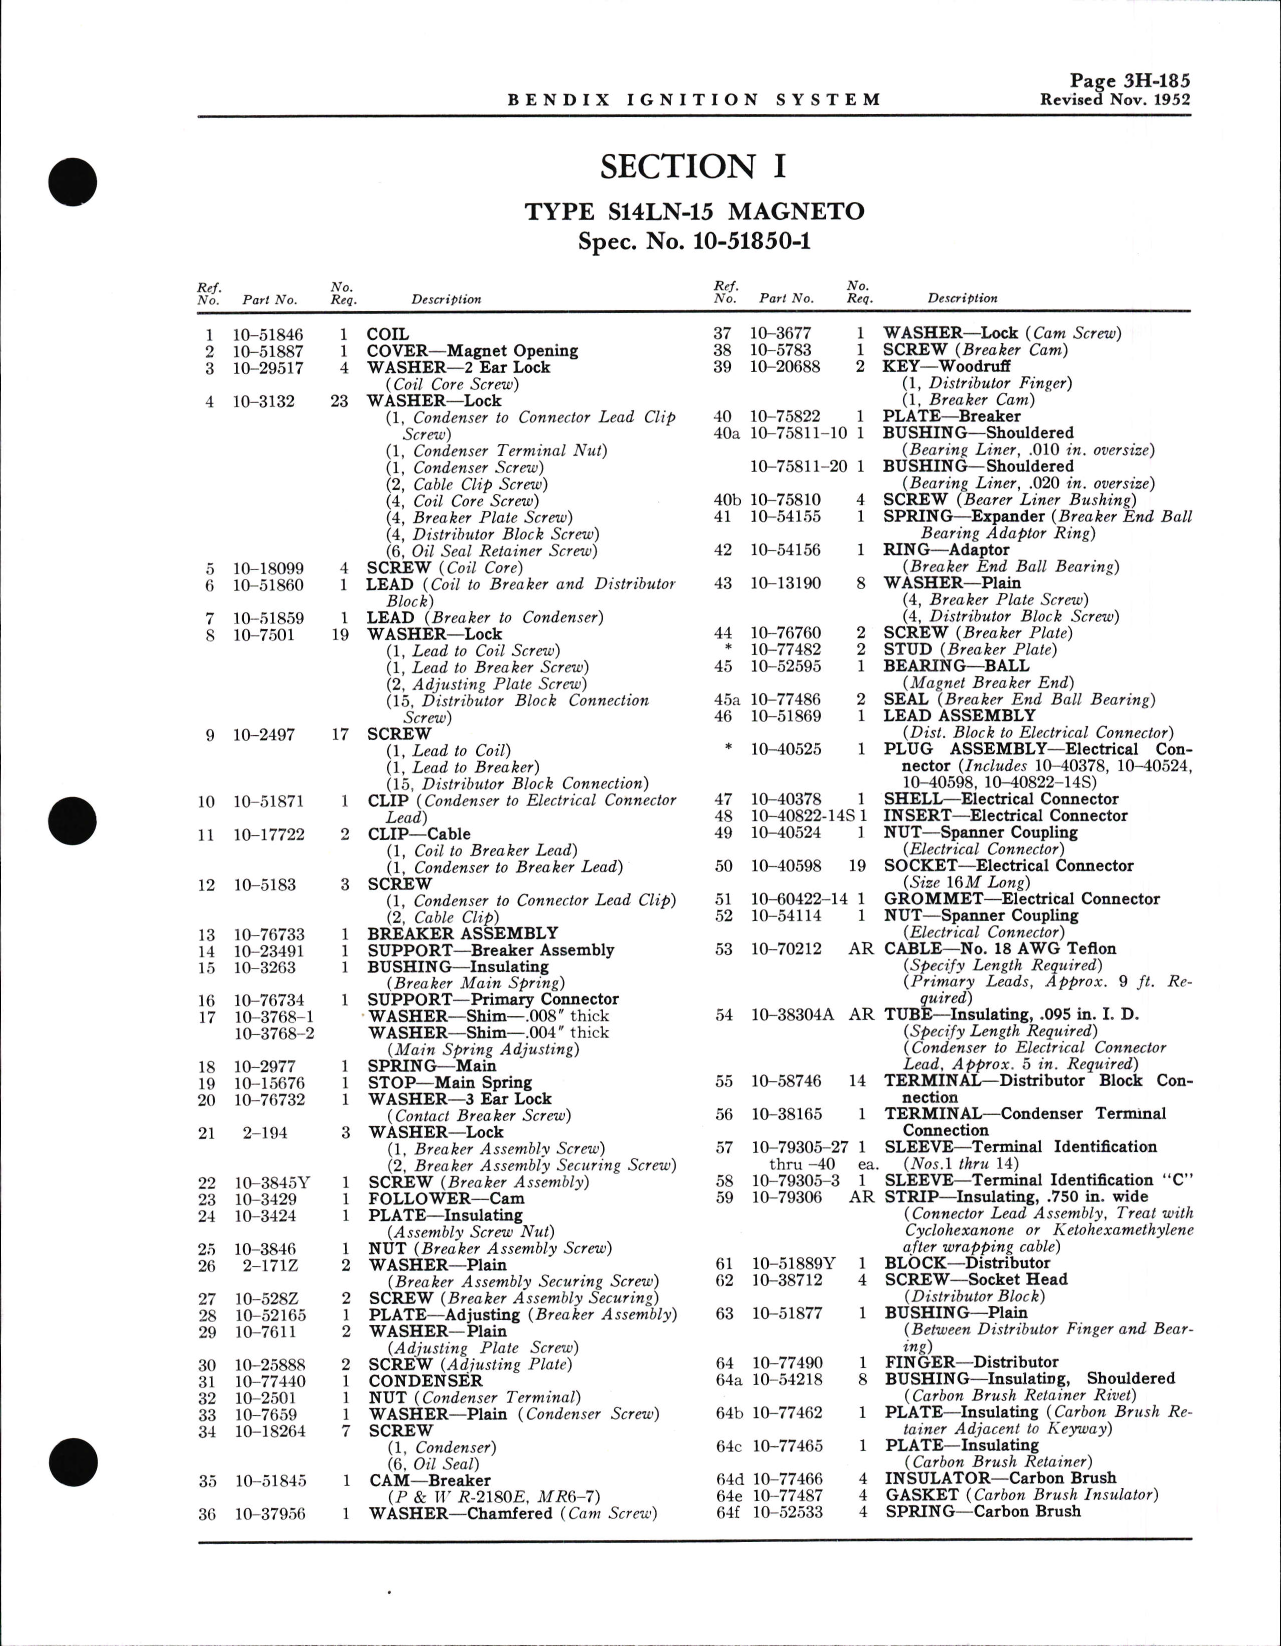 Sample page 5 from AirCorps Library document: Service Parts List for Bendix Low Tension - High Altitude Ignition used on Pratt & Whitney R-2180 E Series